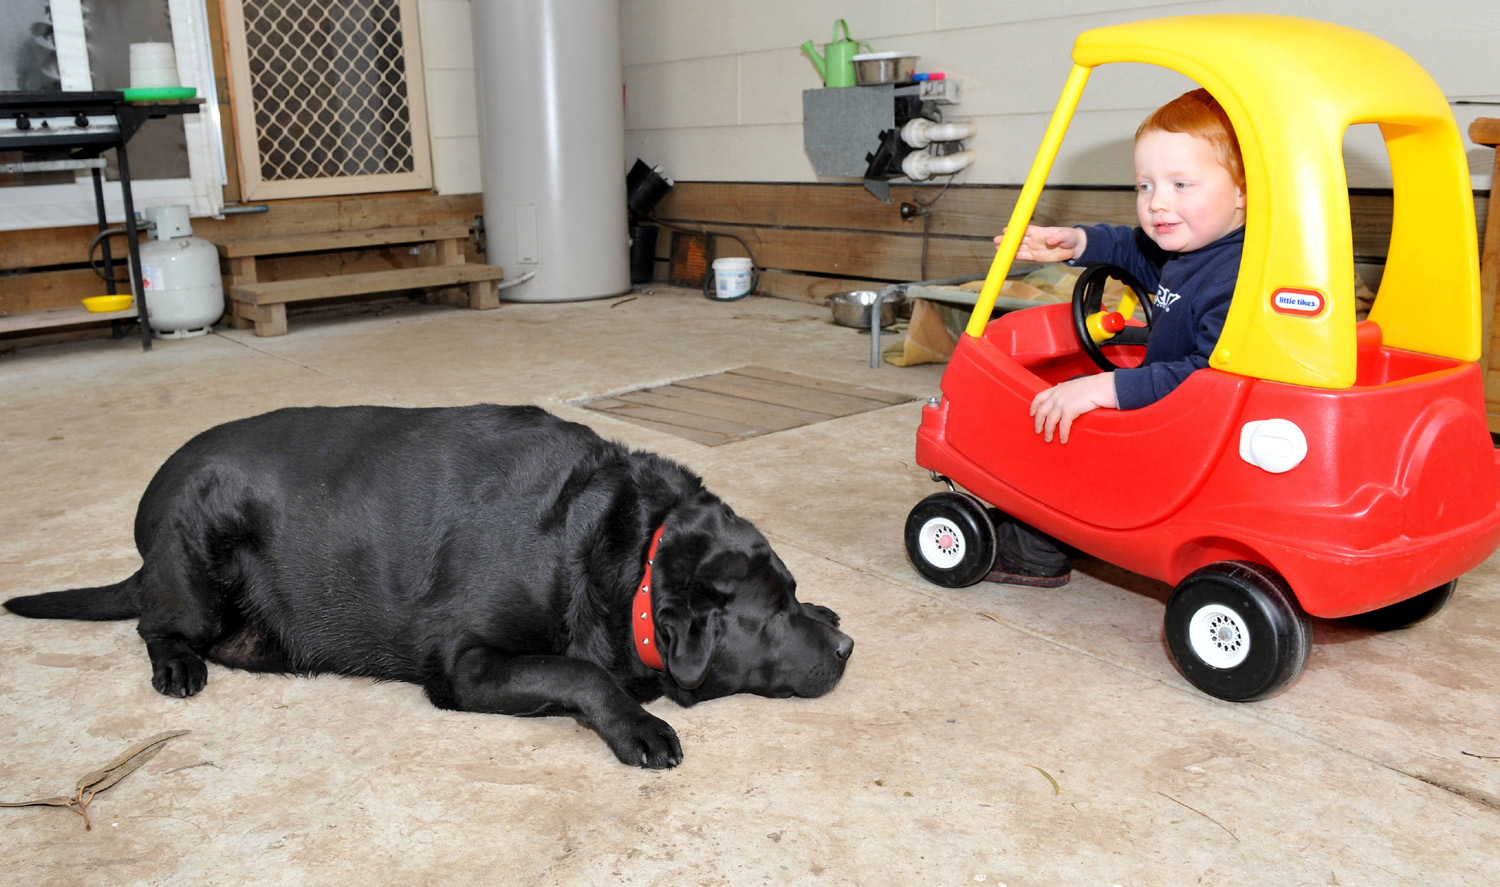 Sampson, the 187-pound labrador, at the Animal Aid vet in Yarra Glen, Victoria, June 21, 2011. (Mike Keating / Newspix / Getty Images)